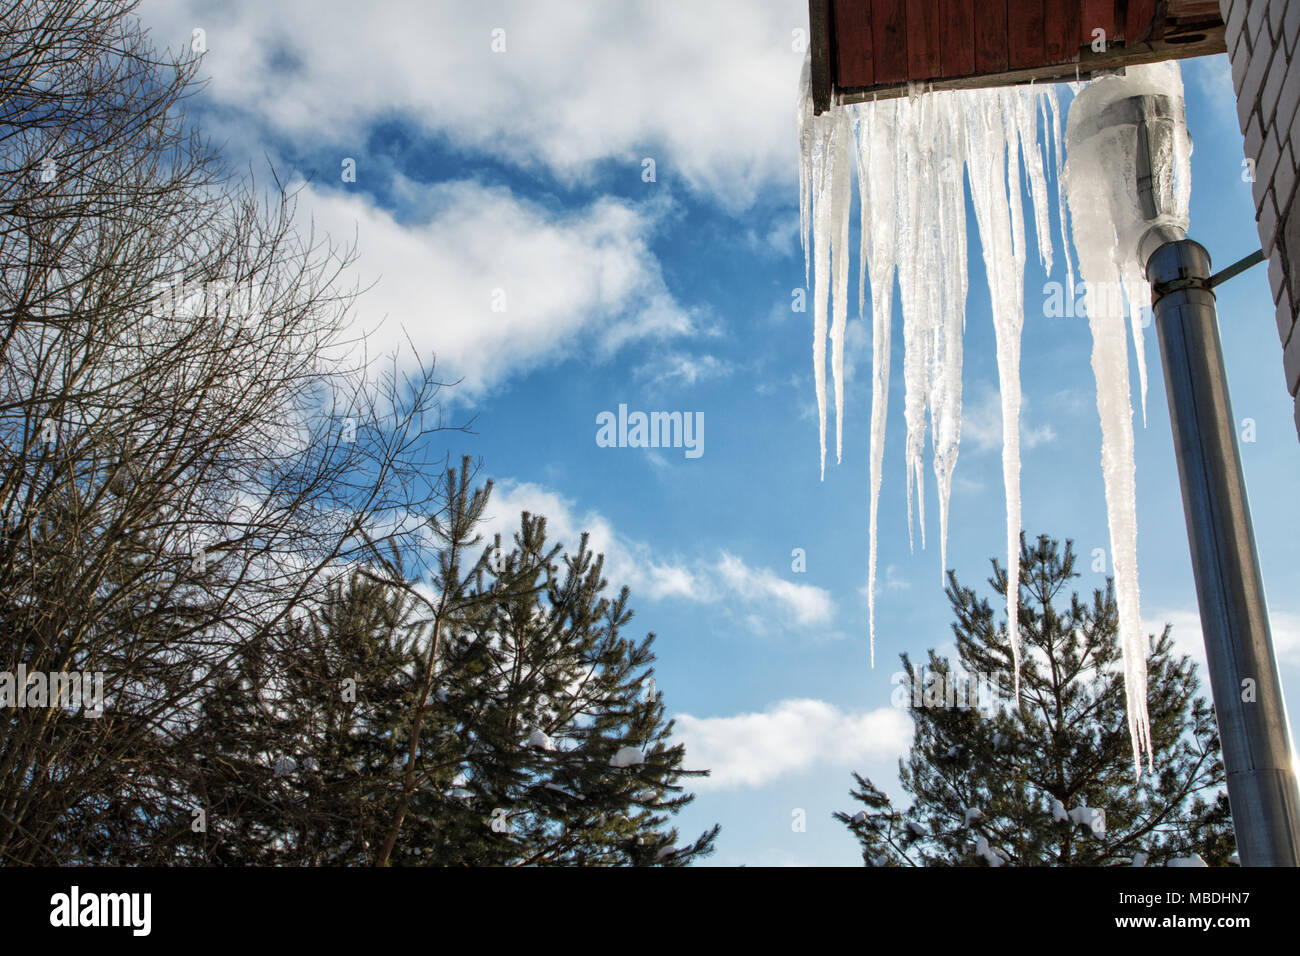 Large icicles hang from the roof of the house against the sky Stock Photo